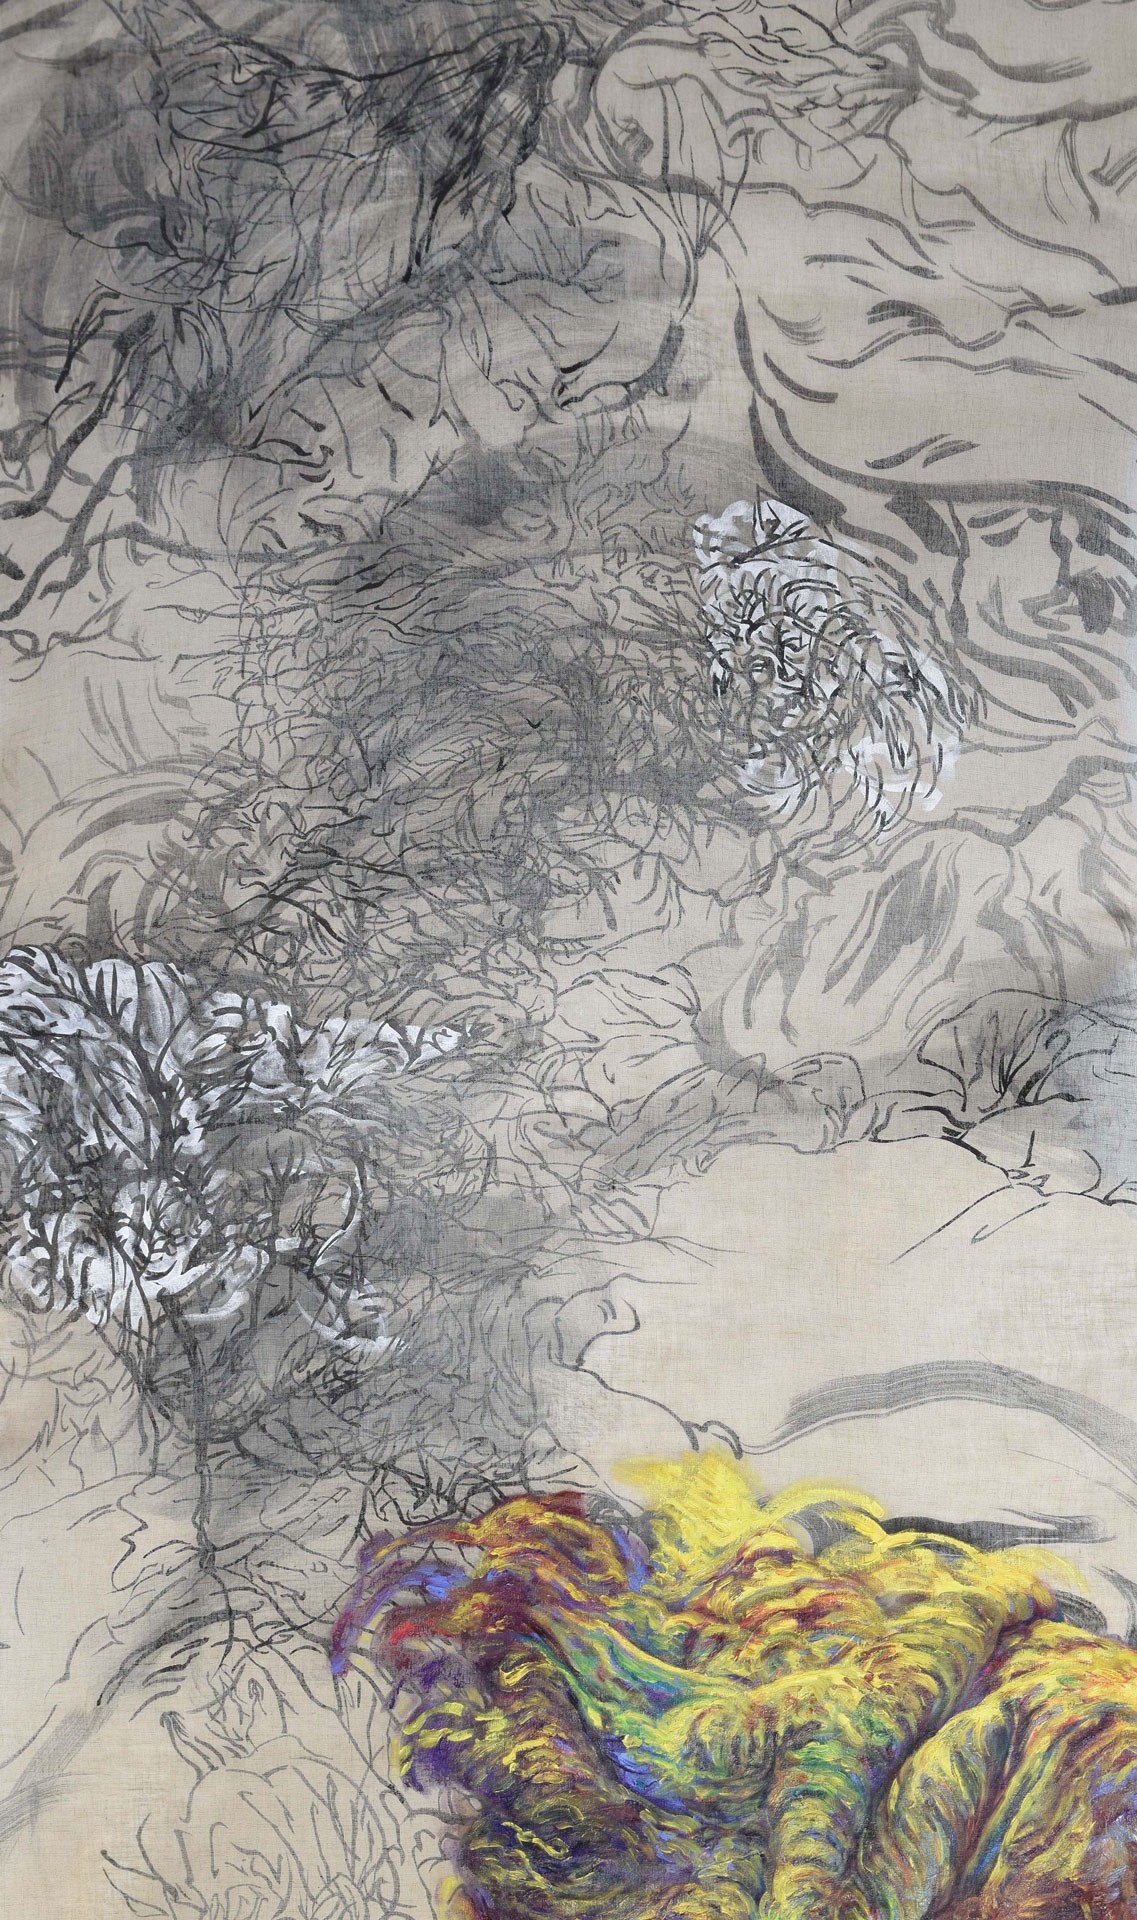 <BODY><div>FURUKAWA Aika, Lost Colours (detail), 2021</div><div>Sumi ink and oil on transparent canvas</div><div>© FURUKAWA Aika</div></BODY>